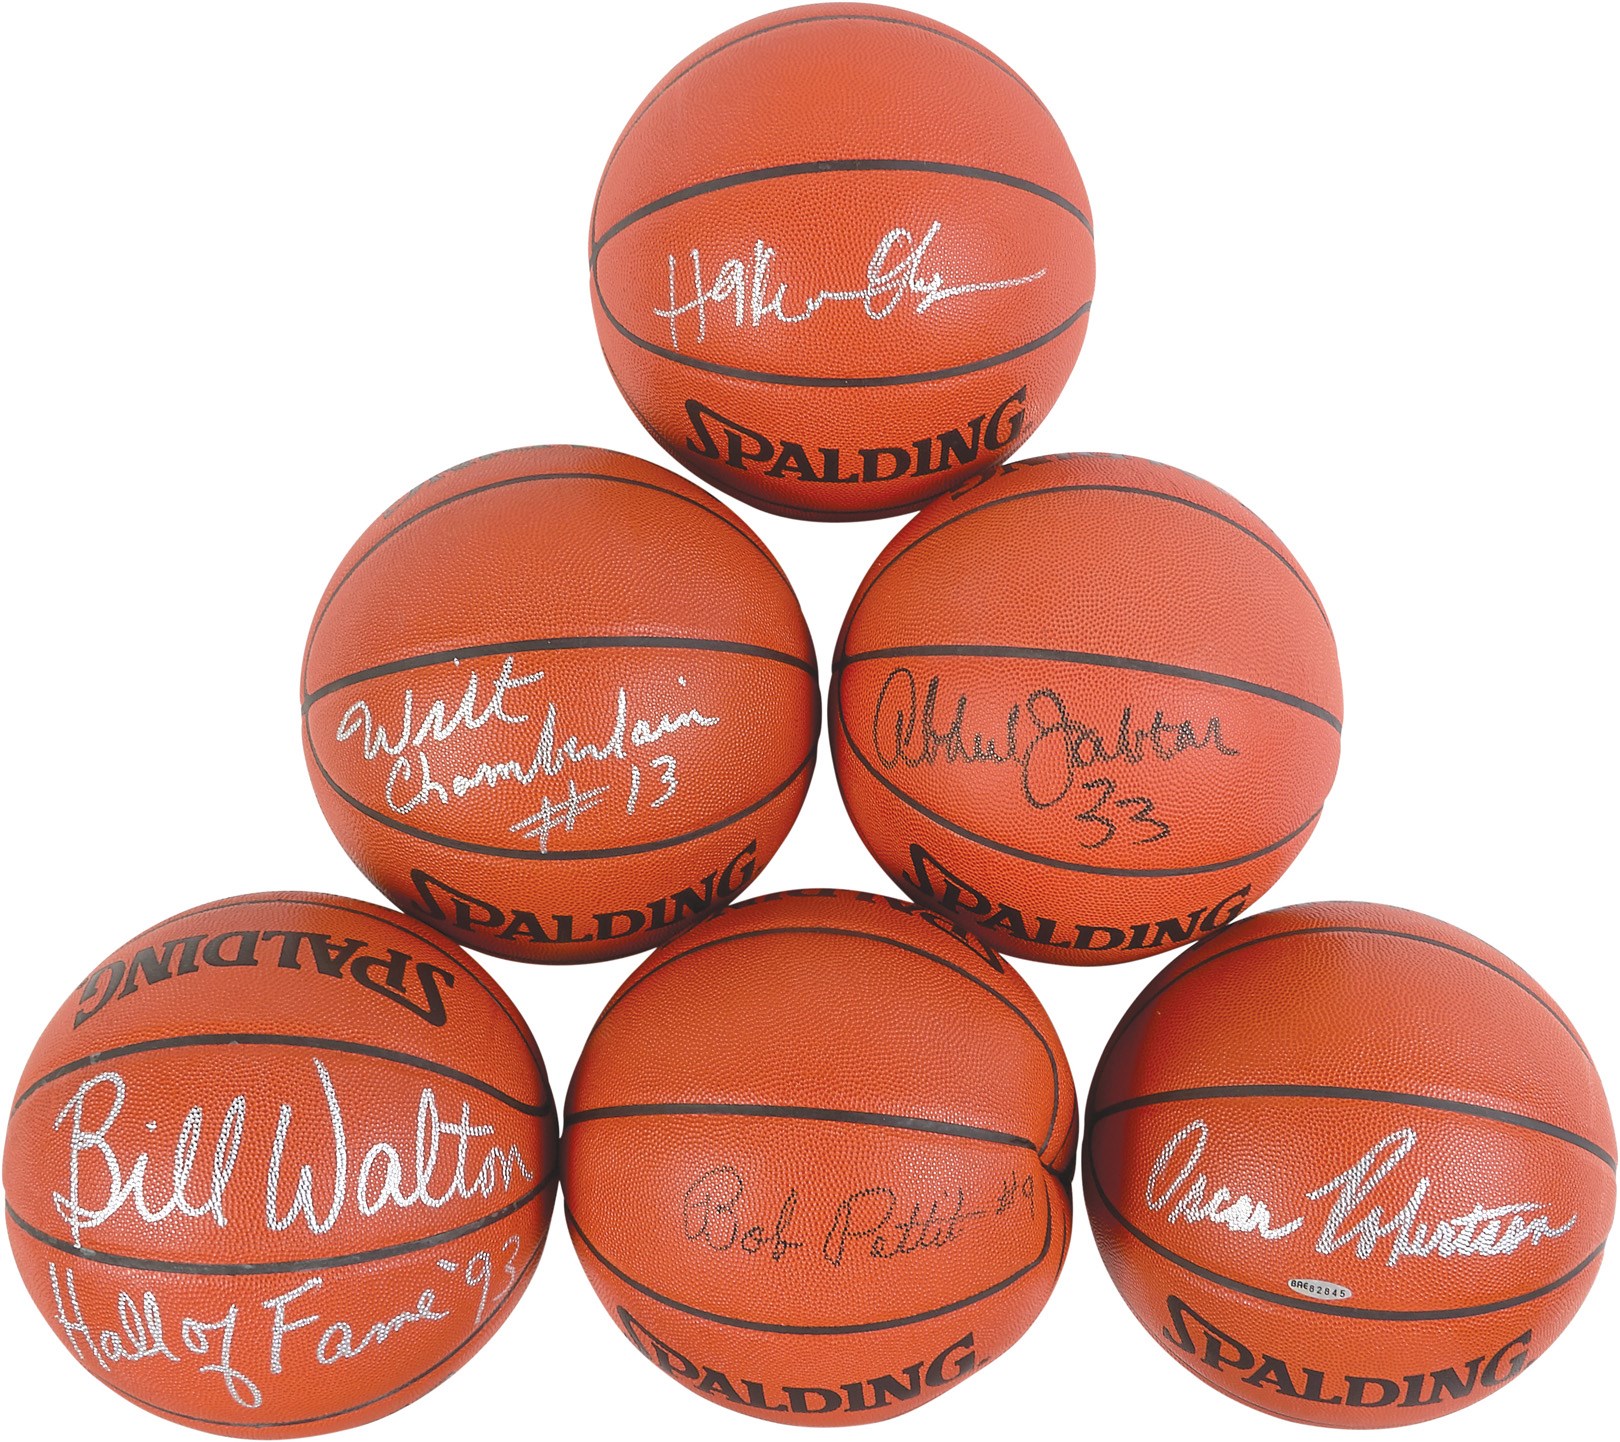 - NBA 50 Greatest & Legends Signed Basketball Collection with Wilt Chamberlain (11)